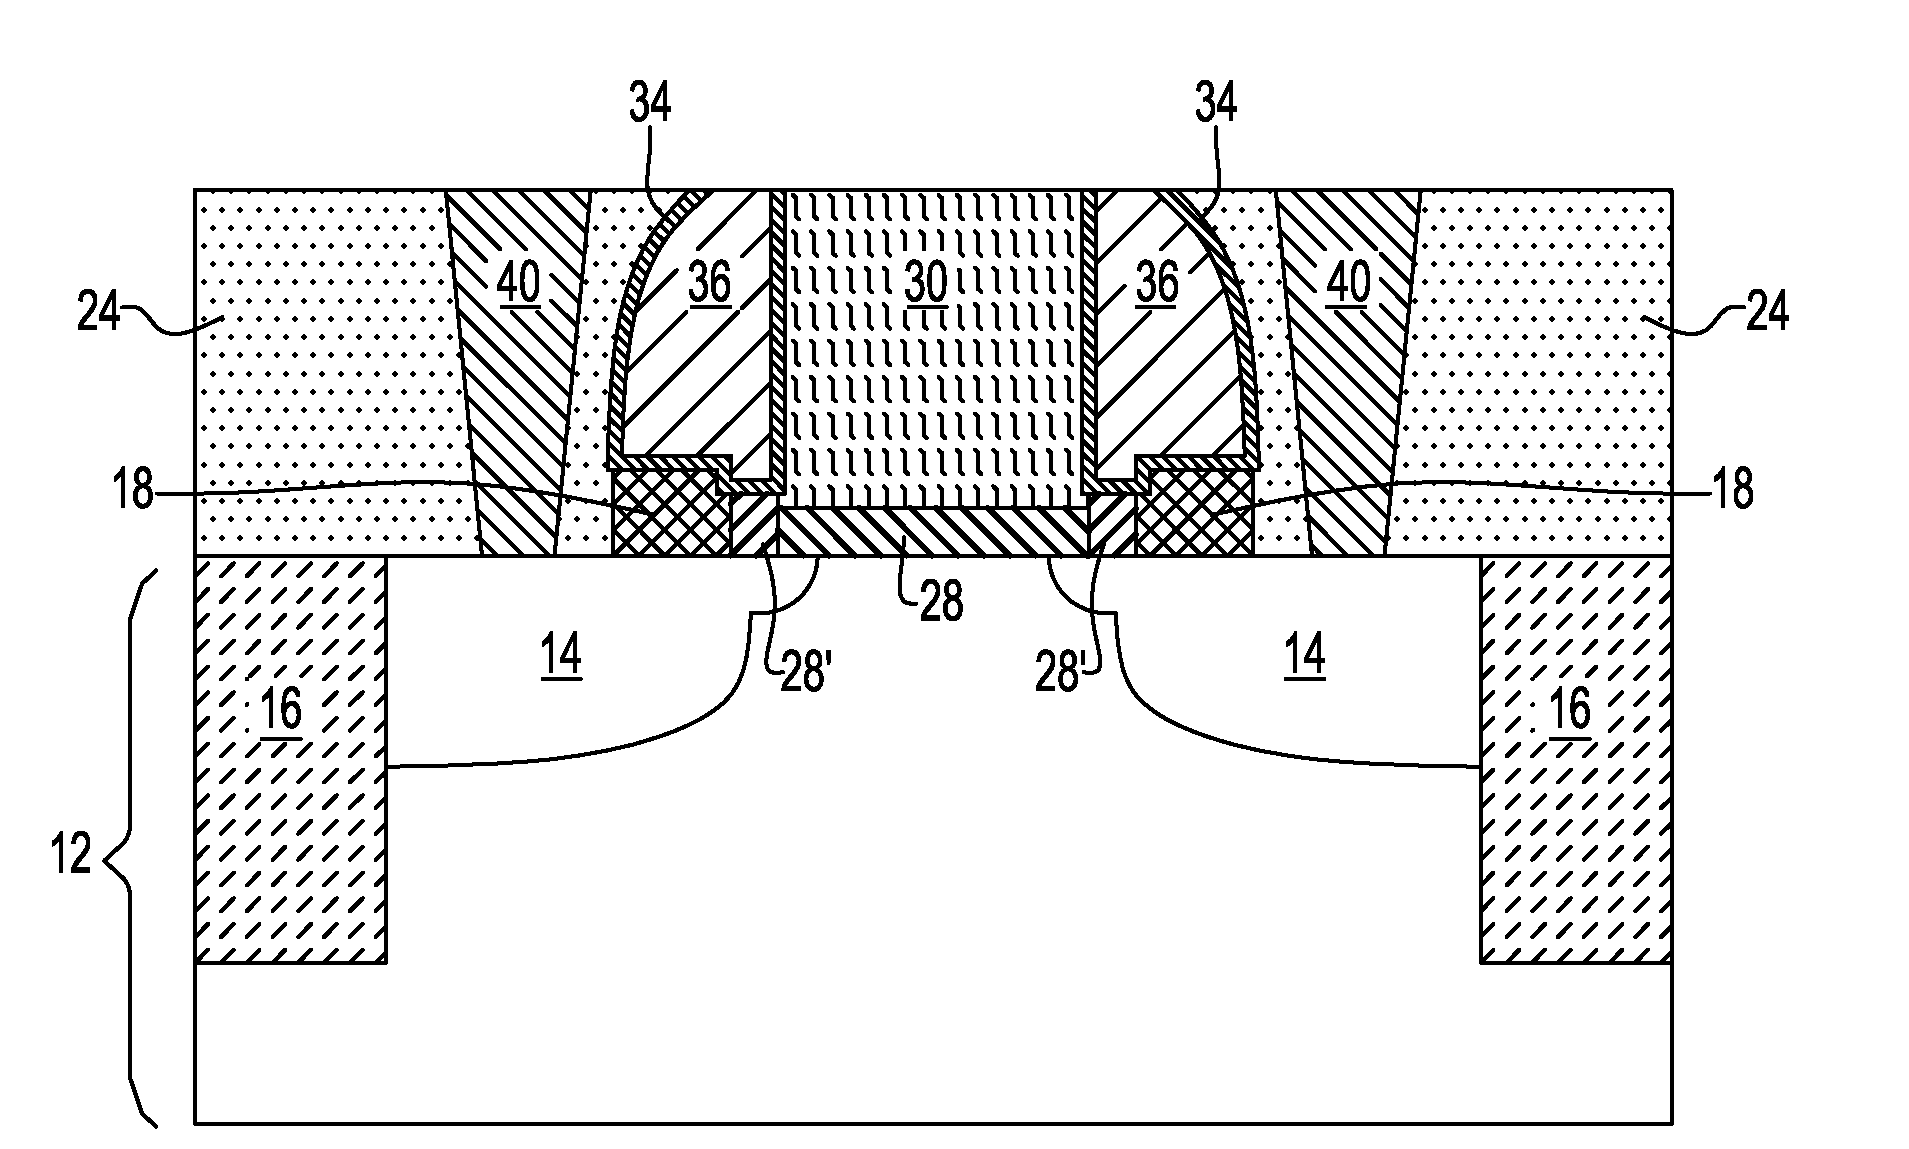 HIGH-k/METAL GATE MOSFET WITH REDUCED PARASITIC CAPACITANCE